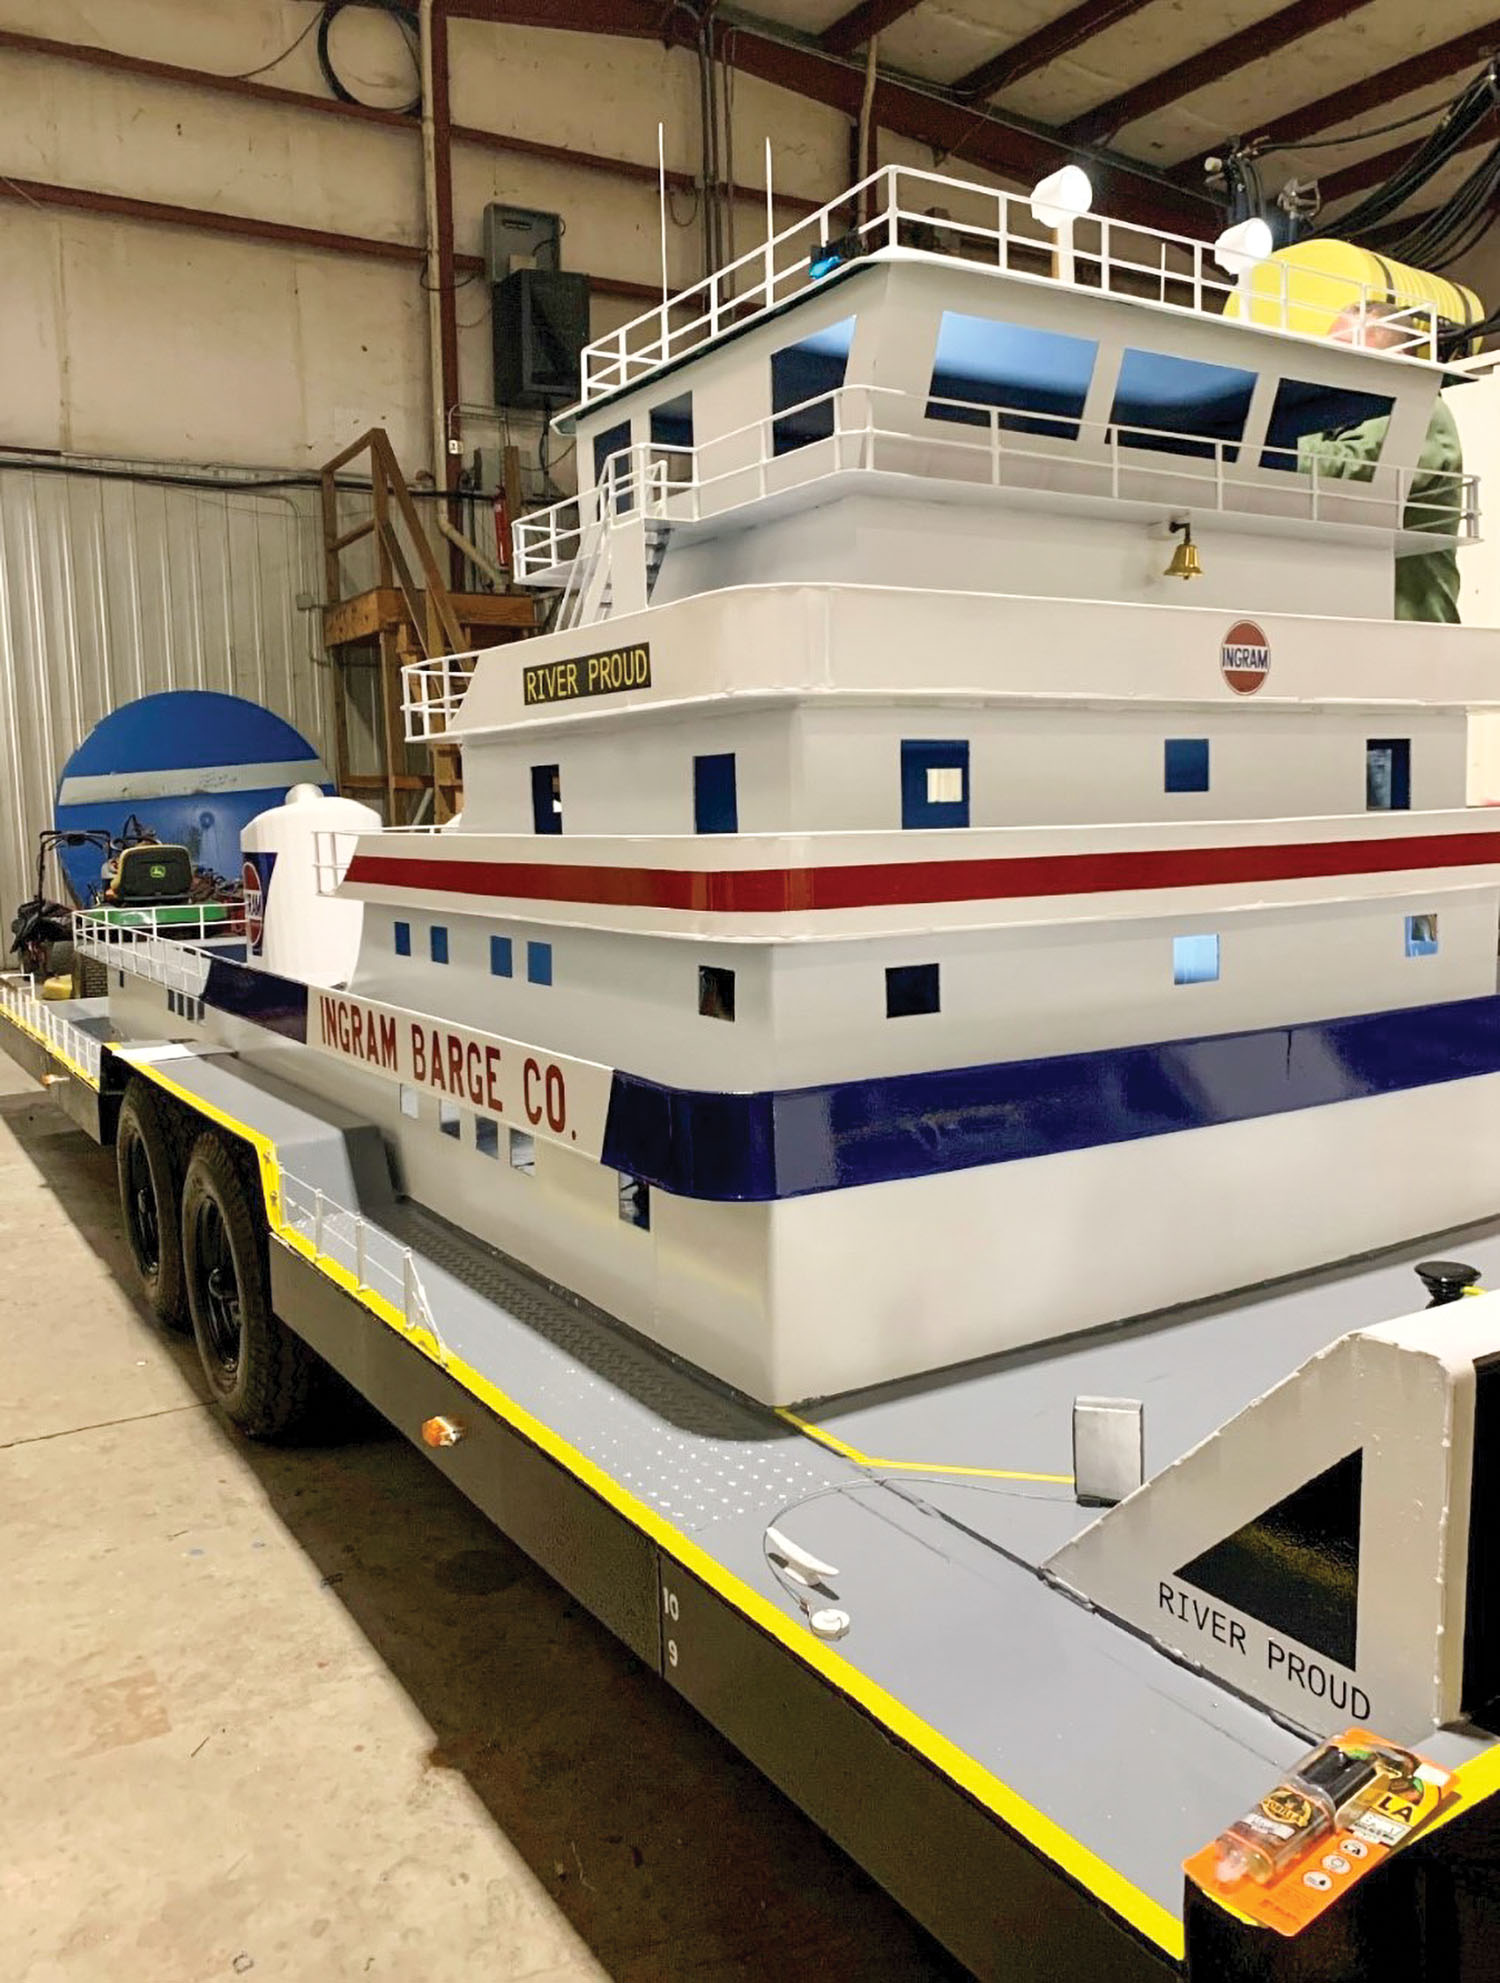 Ingram Barge Line employees did the metalwork for the 22-foot towboat float, which is mounted on a trailer, at their Columbus, Ky. facility. They added artificial snow and smoke coming from the stacks this year. (photo courtesy of Ingram Barge Company)